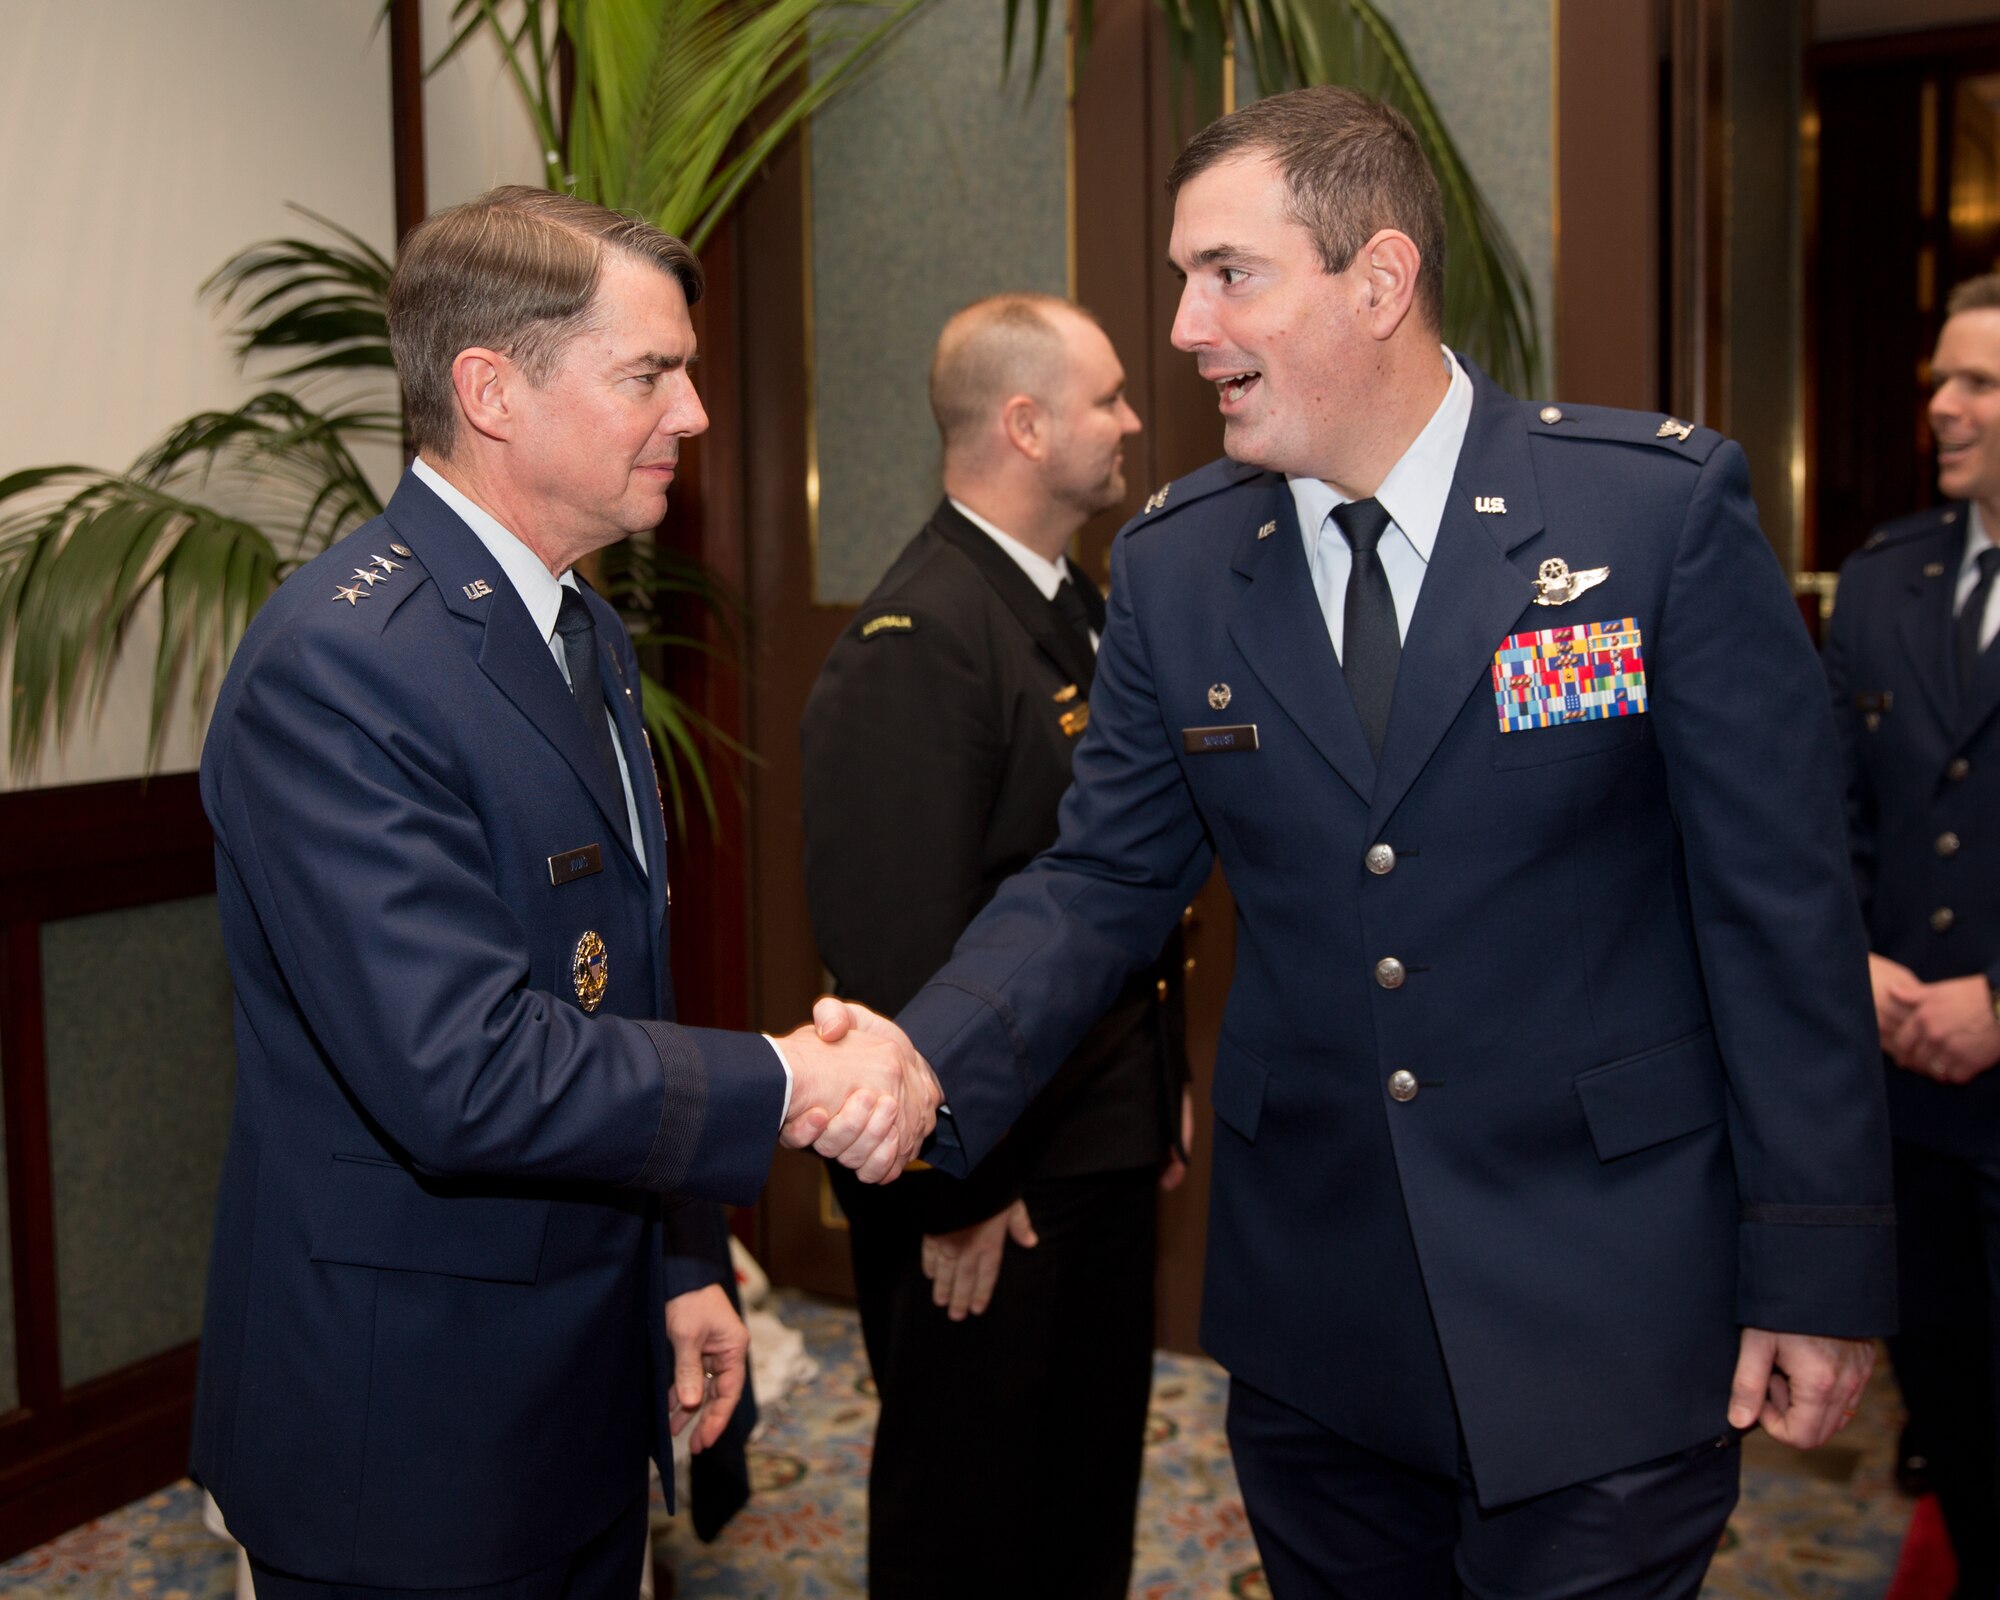 TOKYO, Japan -- (from left to right) U.S. Air Force Lt. Gen. Jan-Marc Jouas, United Nations Command Korea, deputy commander, U.S. Forces Korea, deputy commander, Air Component Command, Republic of Korea/U.S. Combined Forces Command, commander, 7th Air Force, commander, greets U.S. Air Force Col. Mark August, 374th Airlift Wing commander, during the 67th Anniversary of the United Nations, Nov. 29, 2012 at New Sanno Hotel. The United Nations Command was established by UN Security Council Resolution 84 on July 7, 1950 in Tokyo. The command continues to support the Korean Armistice Agreement which was signed July 27, 1953, ending open hostilities. (U.S. Air Force photo by Osakabe Yasuo)